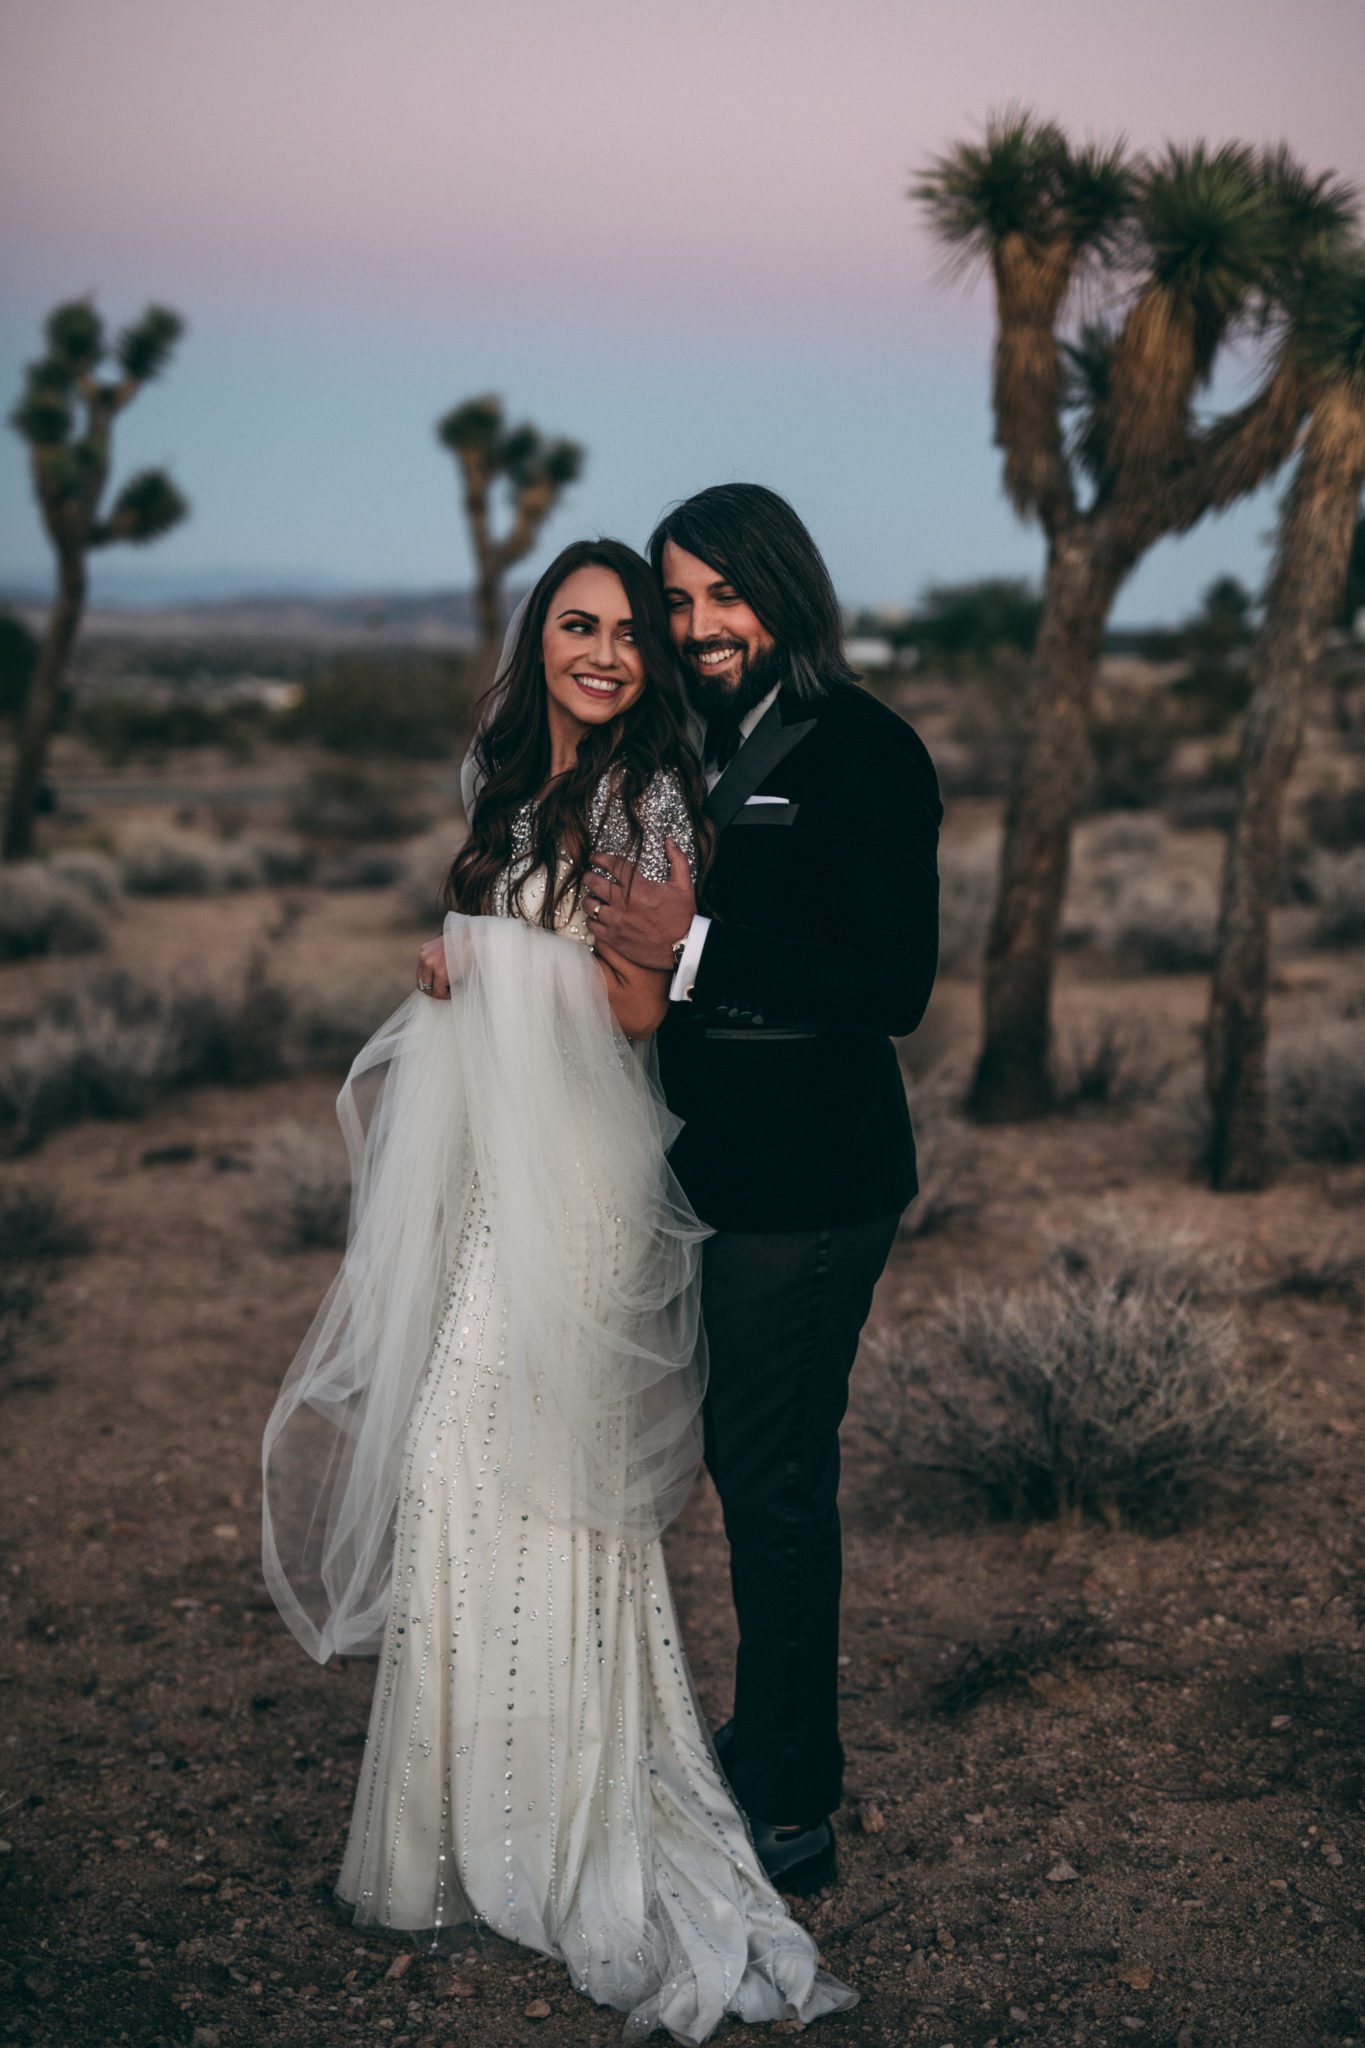 Groom in a custom tailored suit captured in Joshua Tree National Park by Nicole Ashley Photography